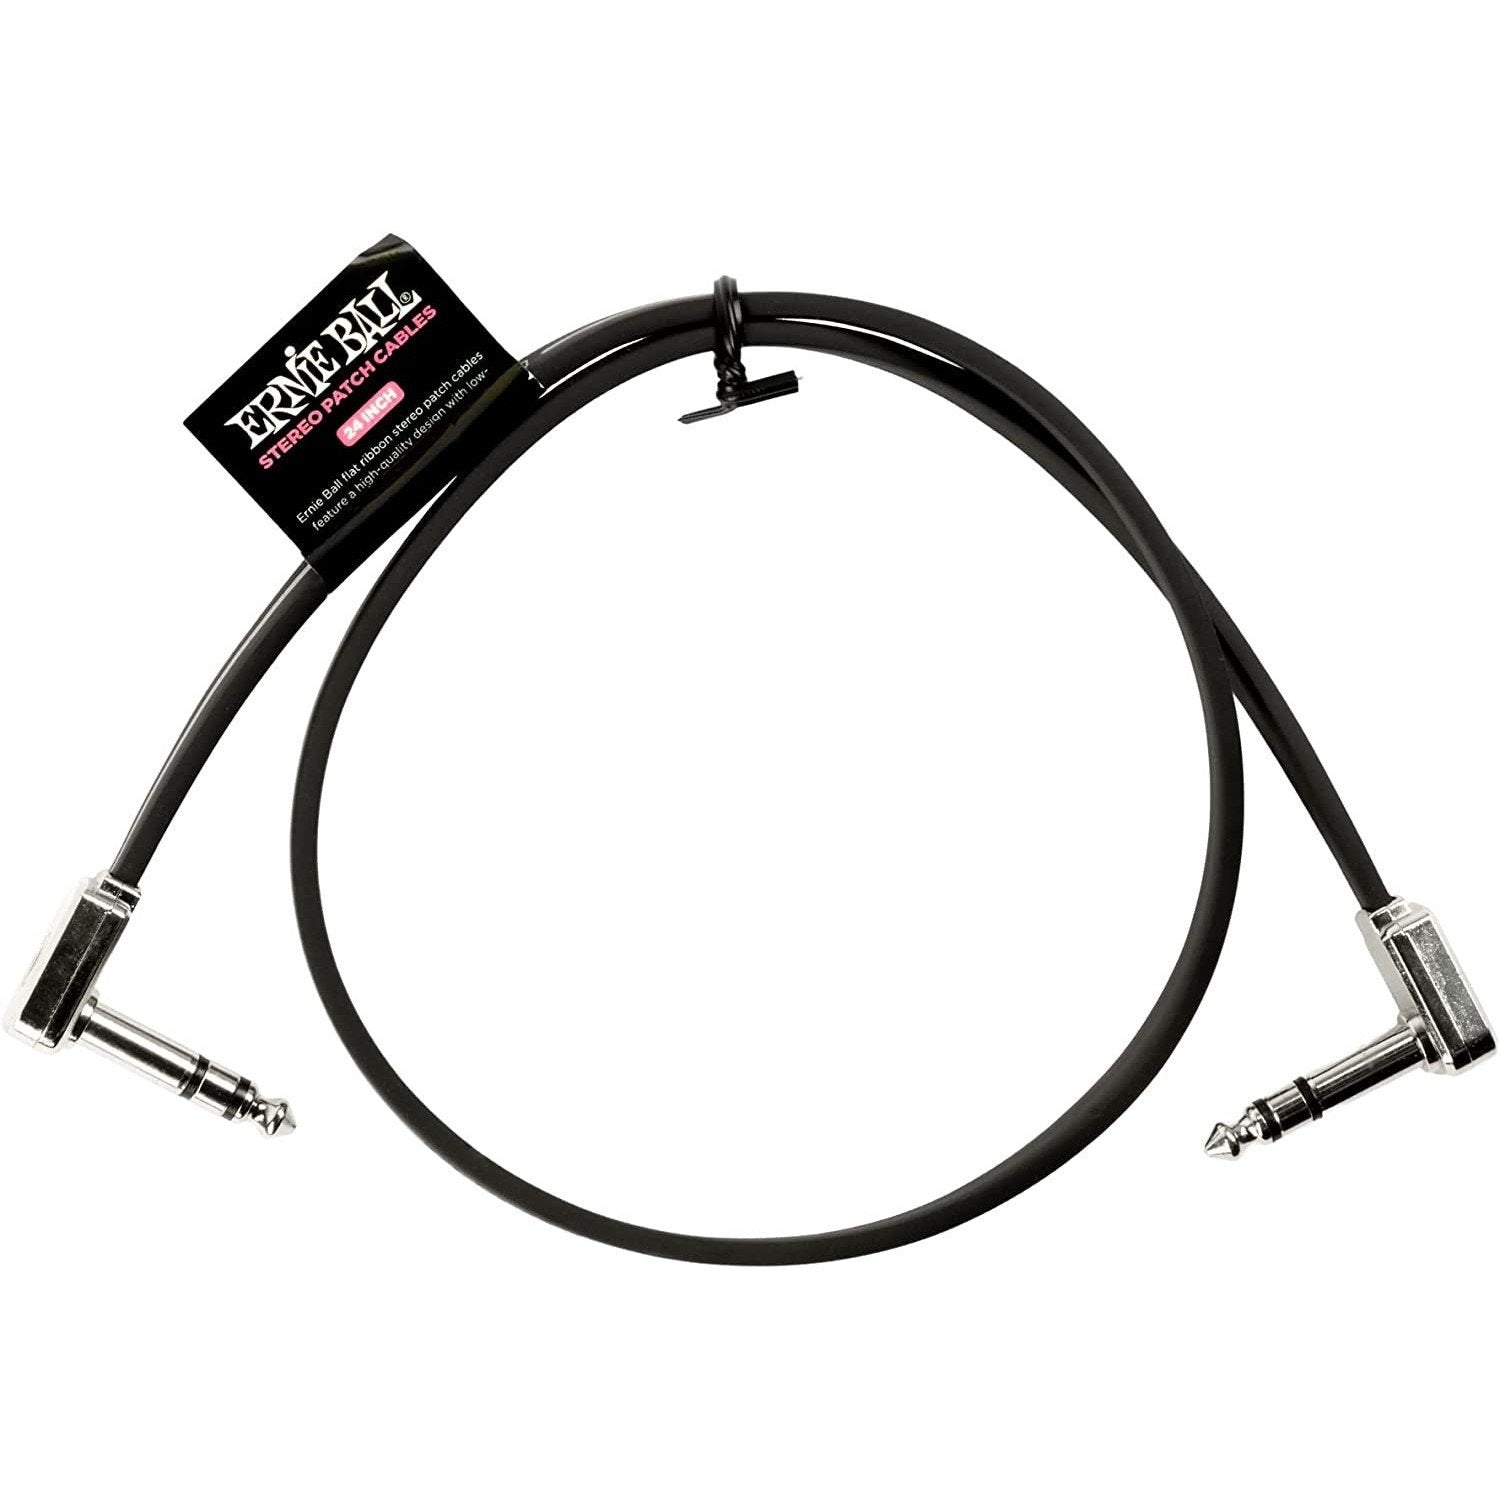 Ernie Ball Single Stereo Flat Ribbon Patch Cable, Black